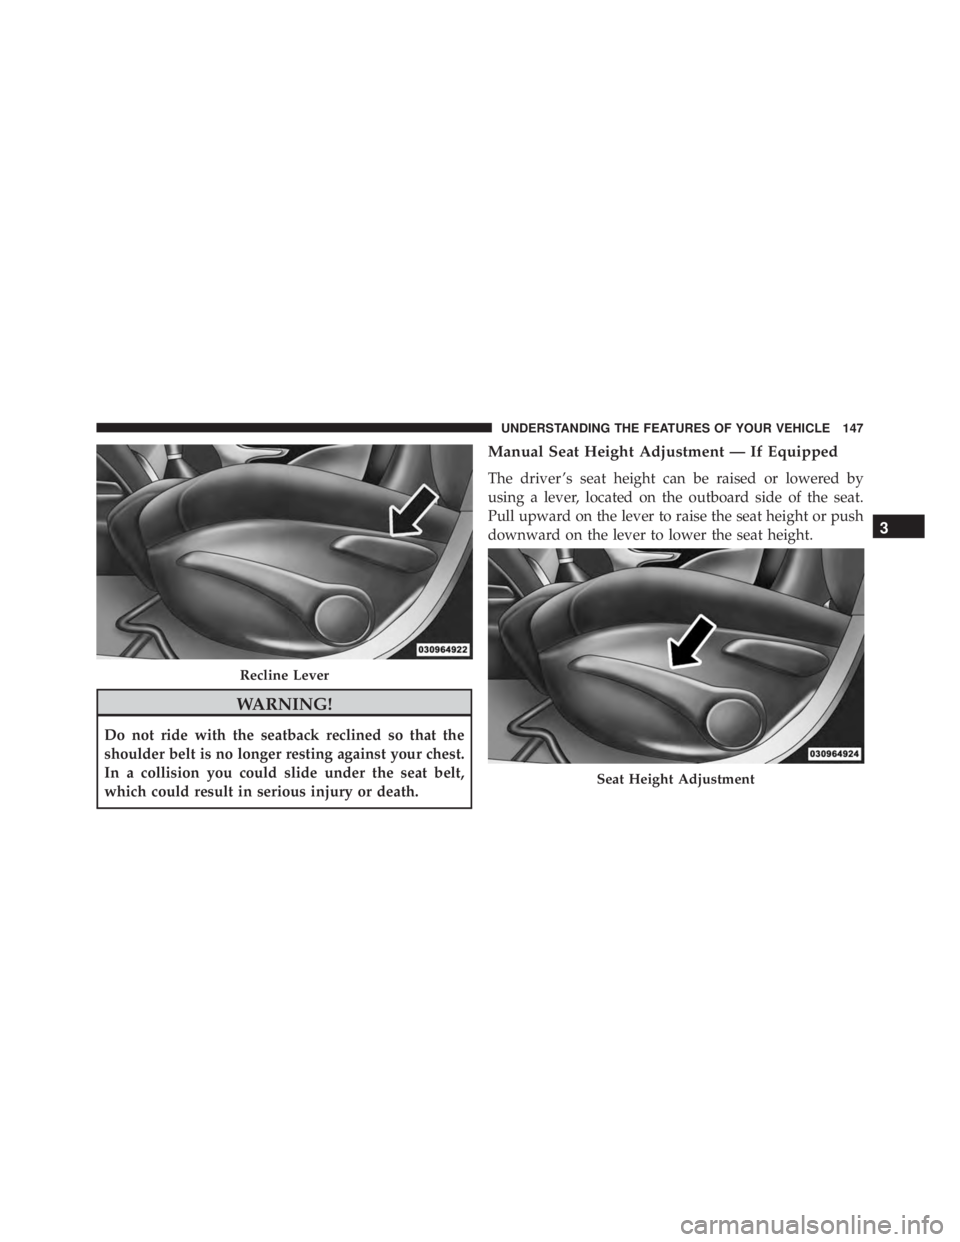 JEEP CHEROKEE LATITUDE 2015  Owners Manual WARNING!
Do not ride with the seatback reclined so that the
shoulder belt is no longer resting against your chest.
In a collision you could slide under the seat belt,
which could result in serious inj